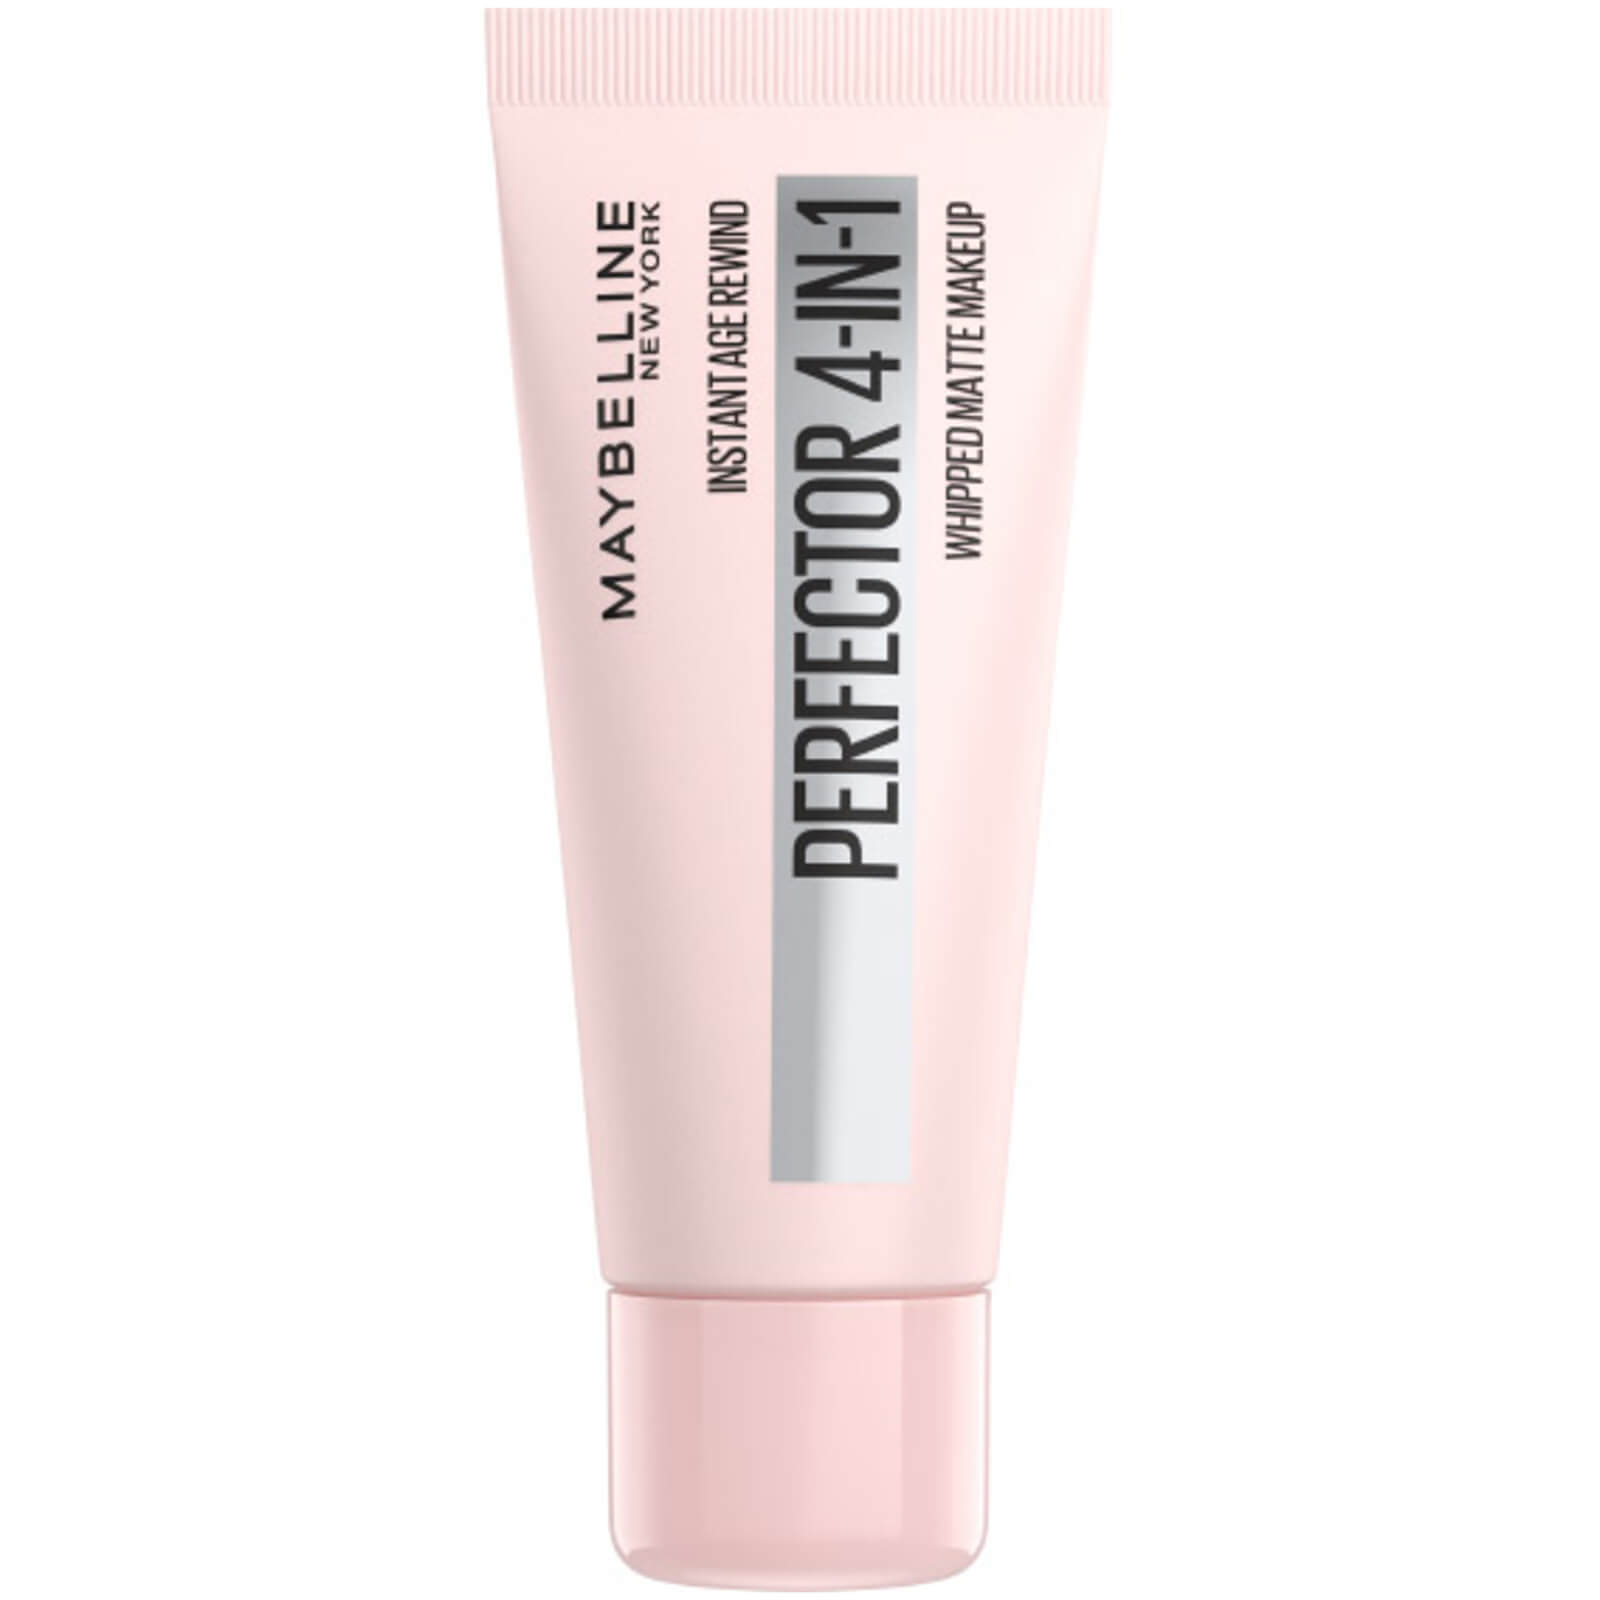 Maybelline Instant Age Rewind Instant Perfector 4-in-1 20ml (Various Shades) - Medium Deep